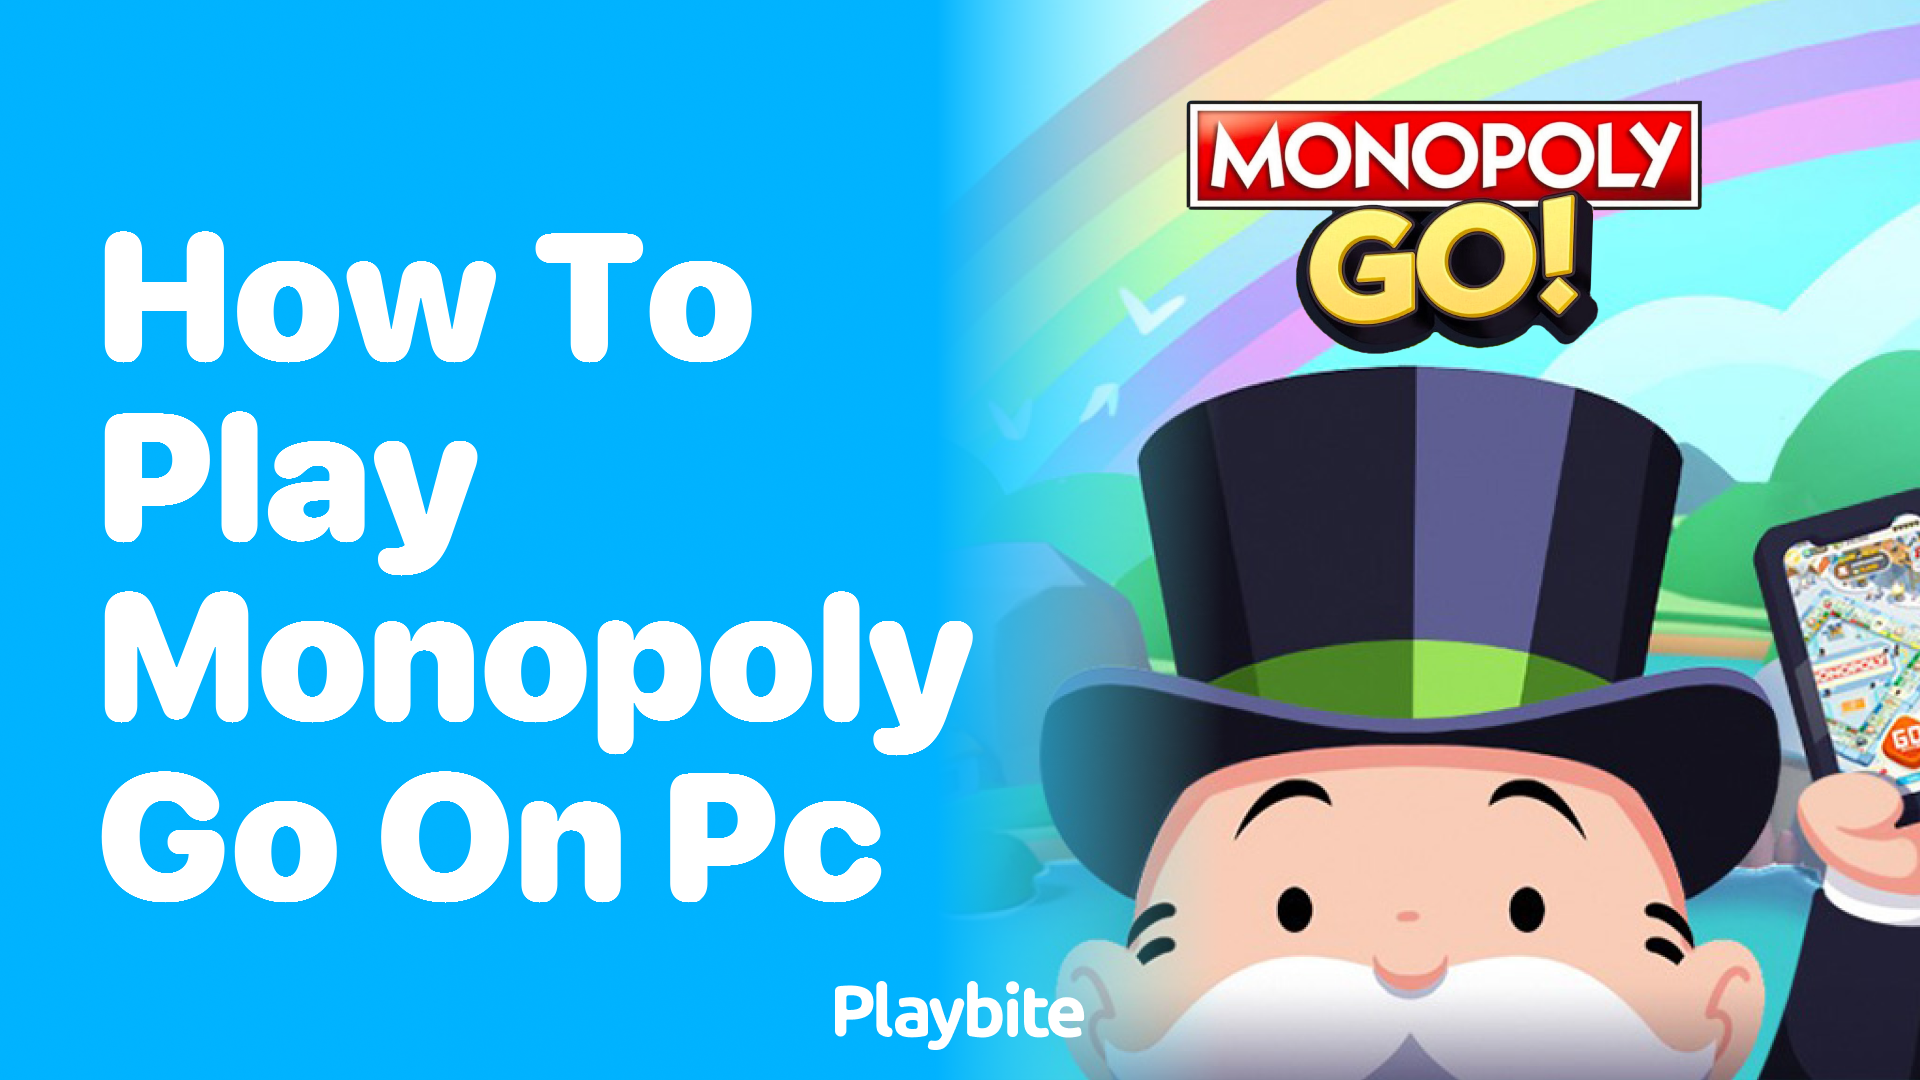 How to Play Monopoly Go on PC: A Fun Guide